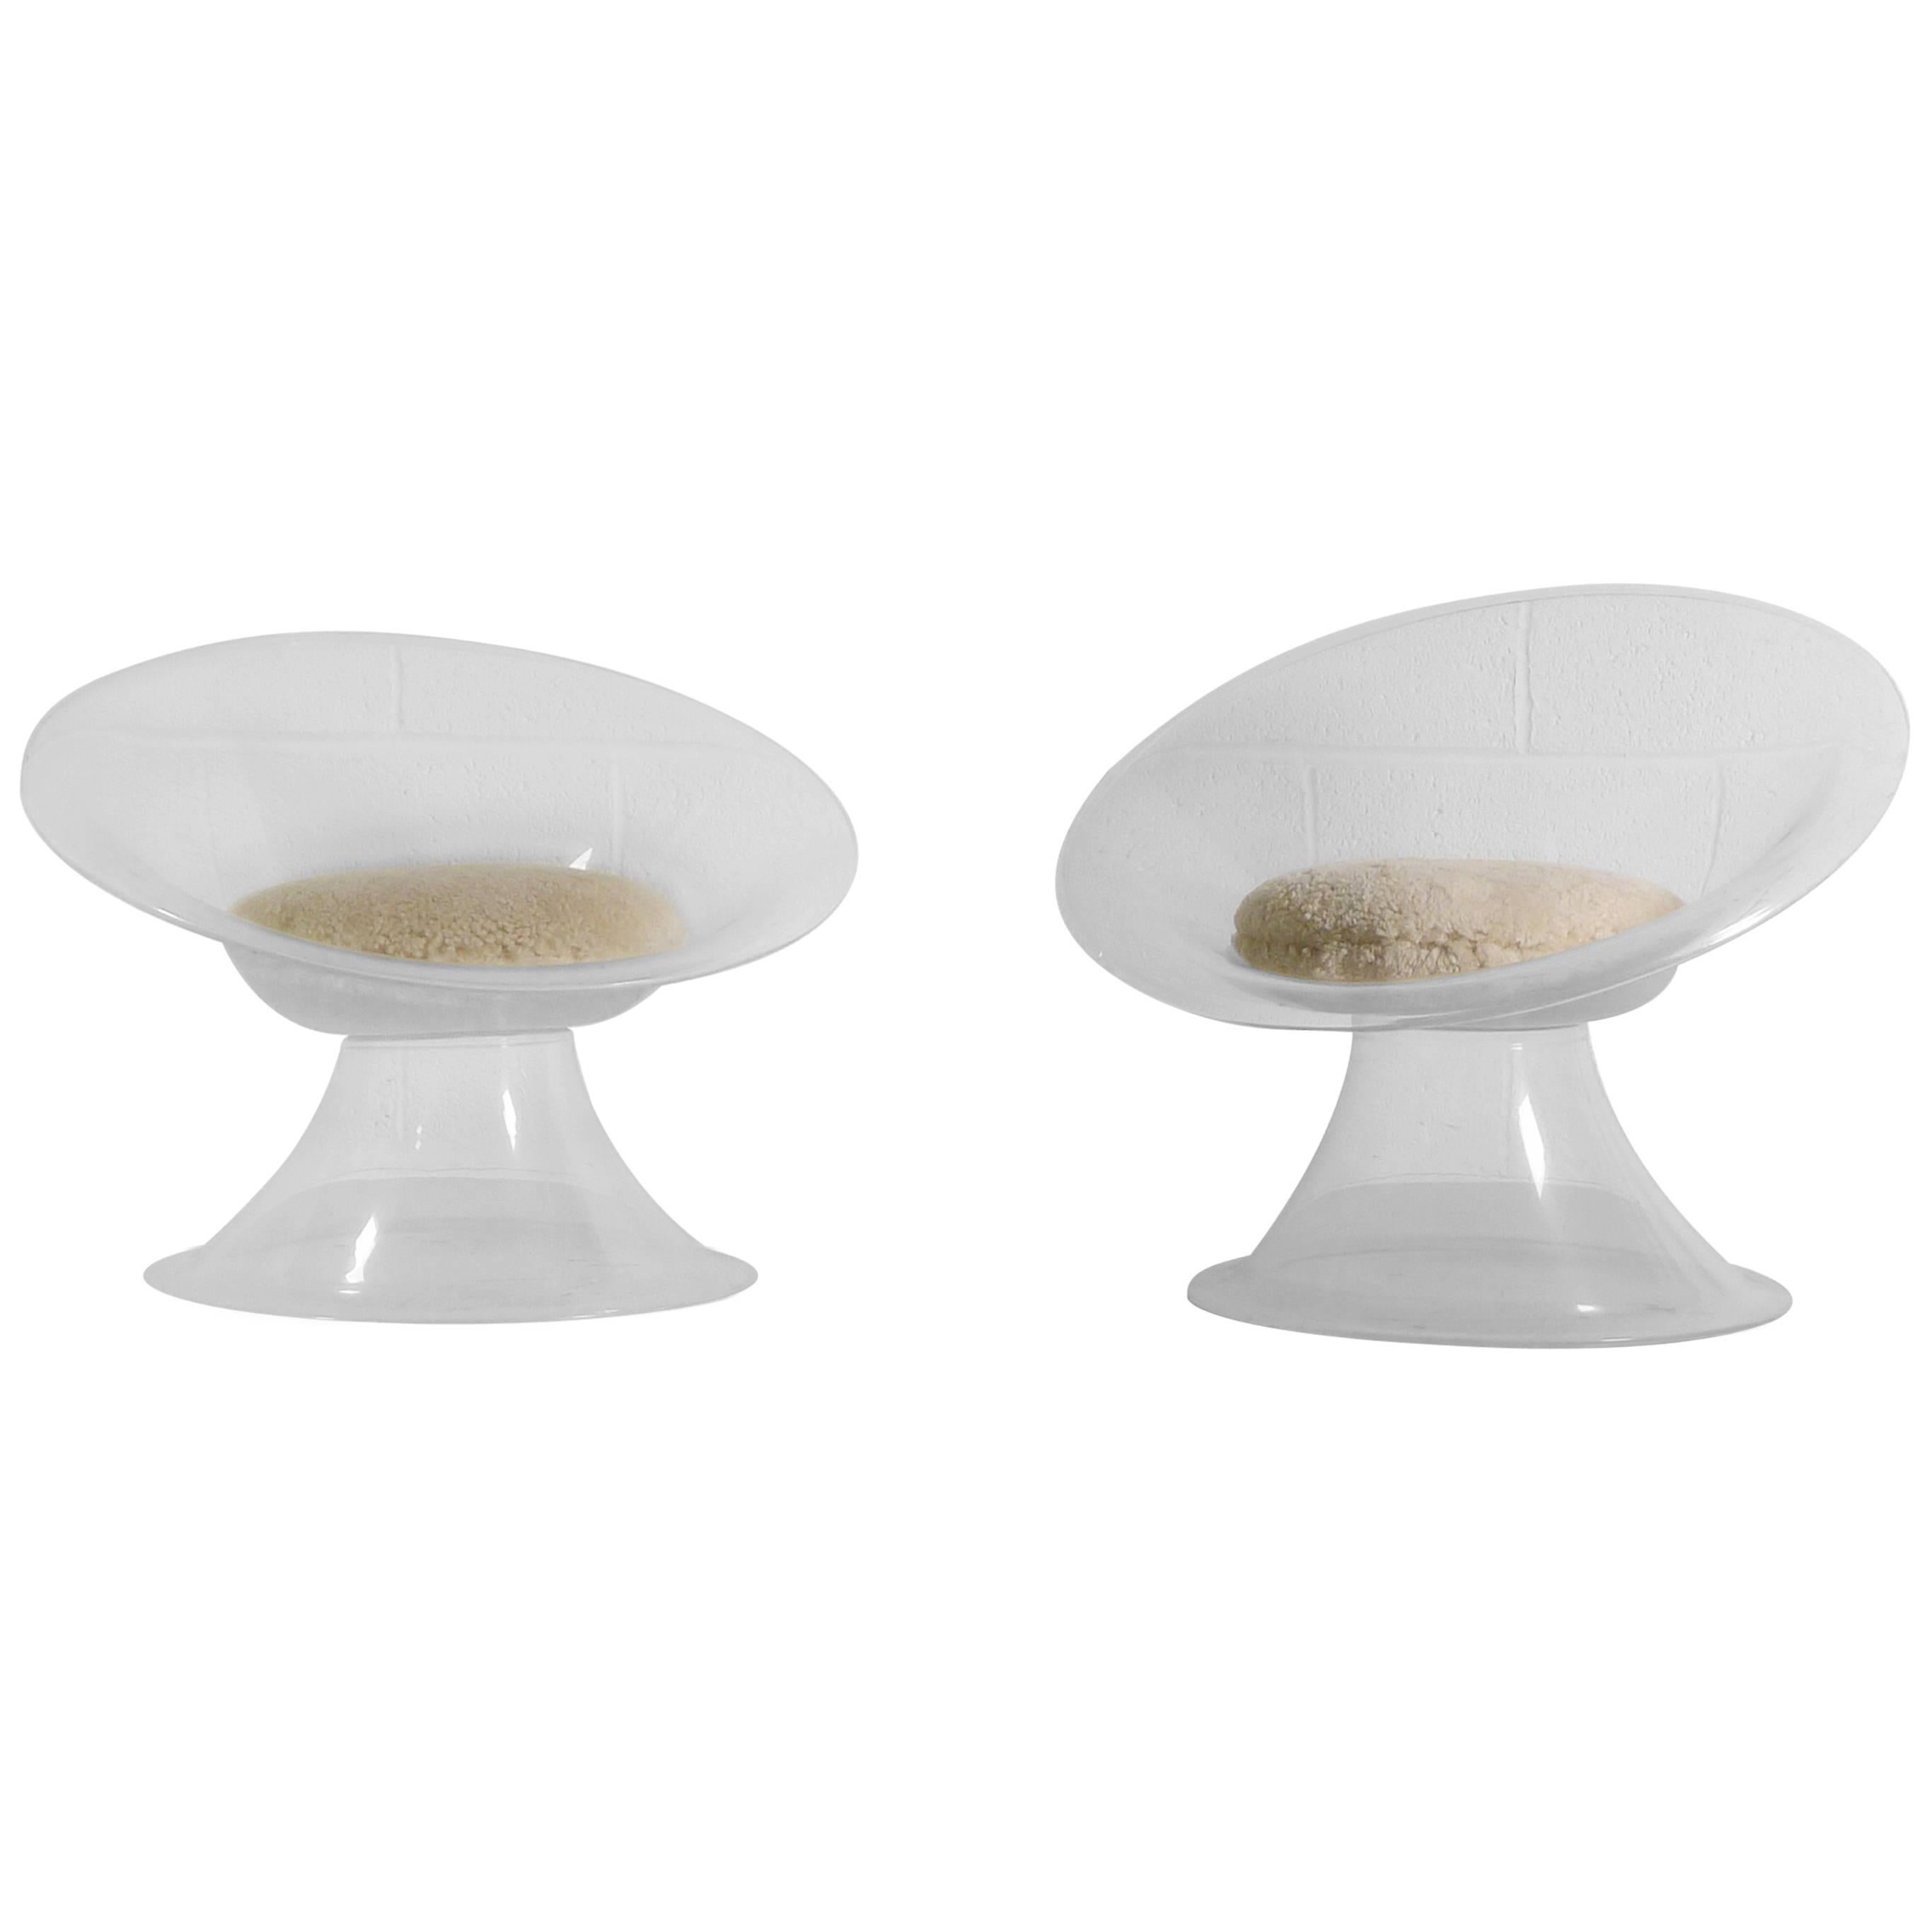 Erwine & Estelle Laverne Pair of Buttercup Chairs from the Invisible Series